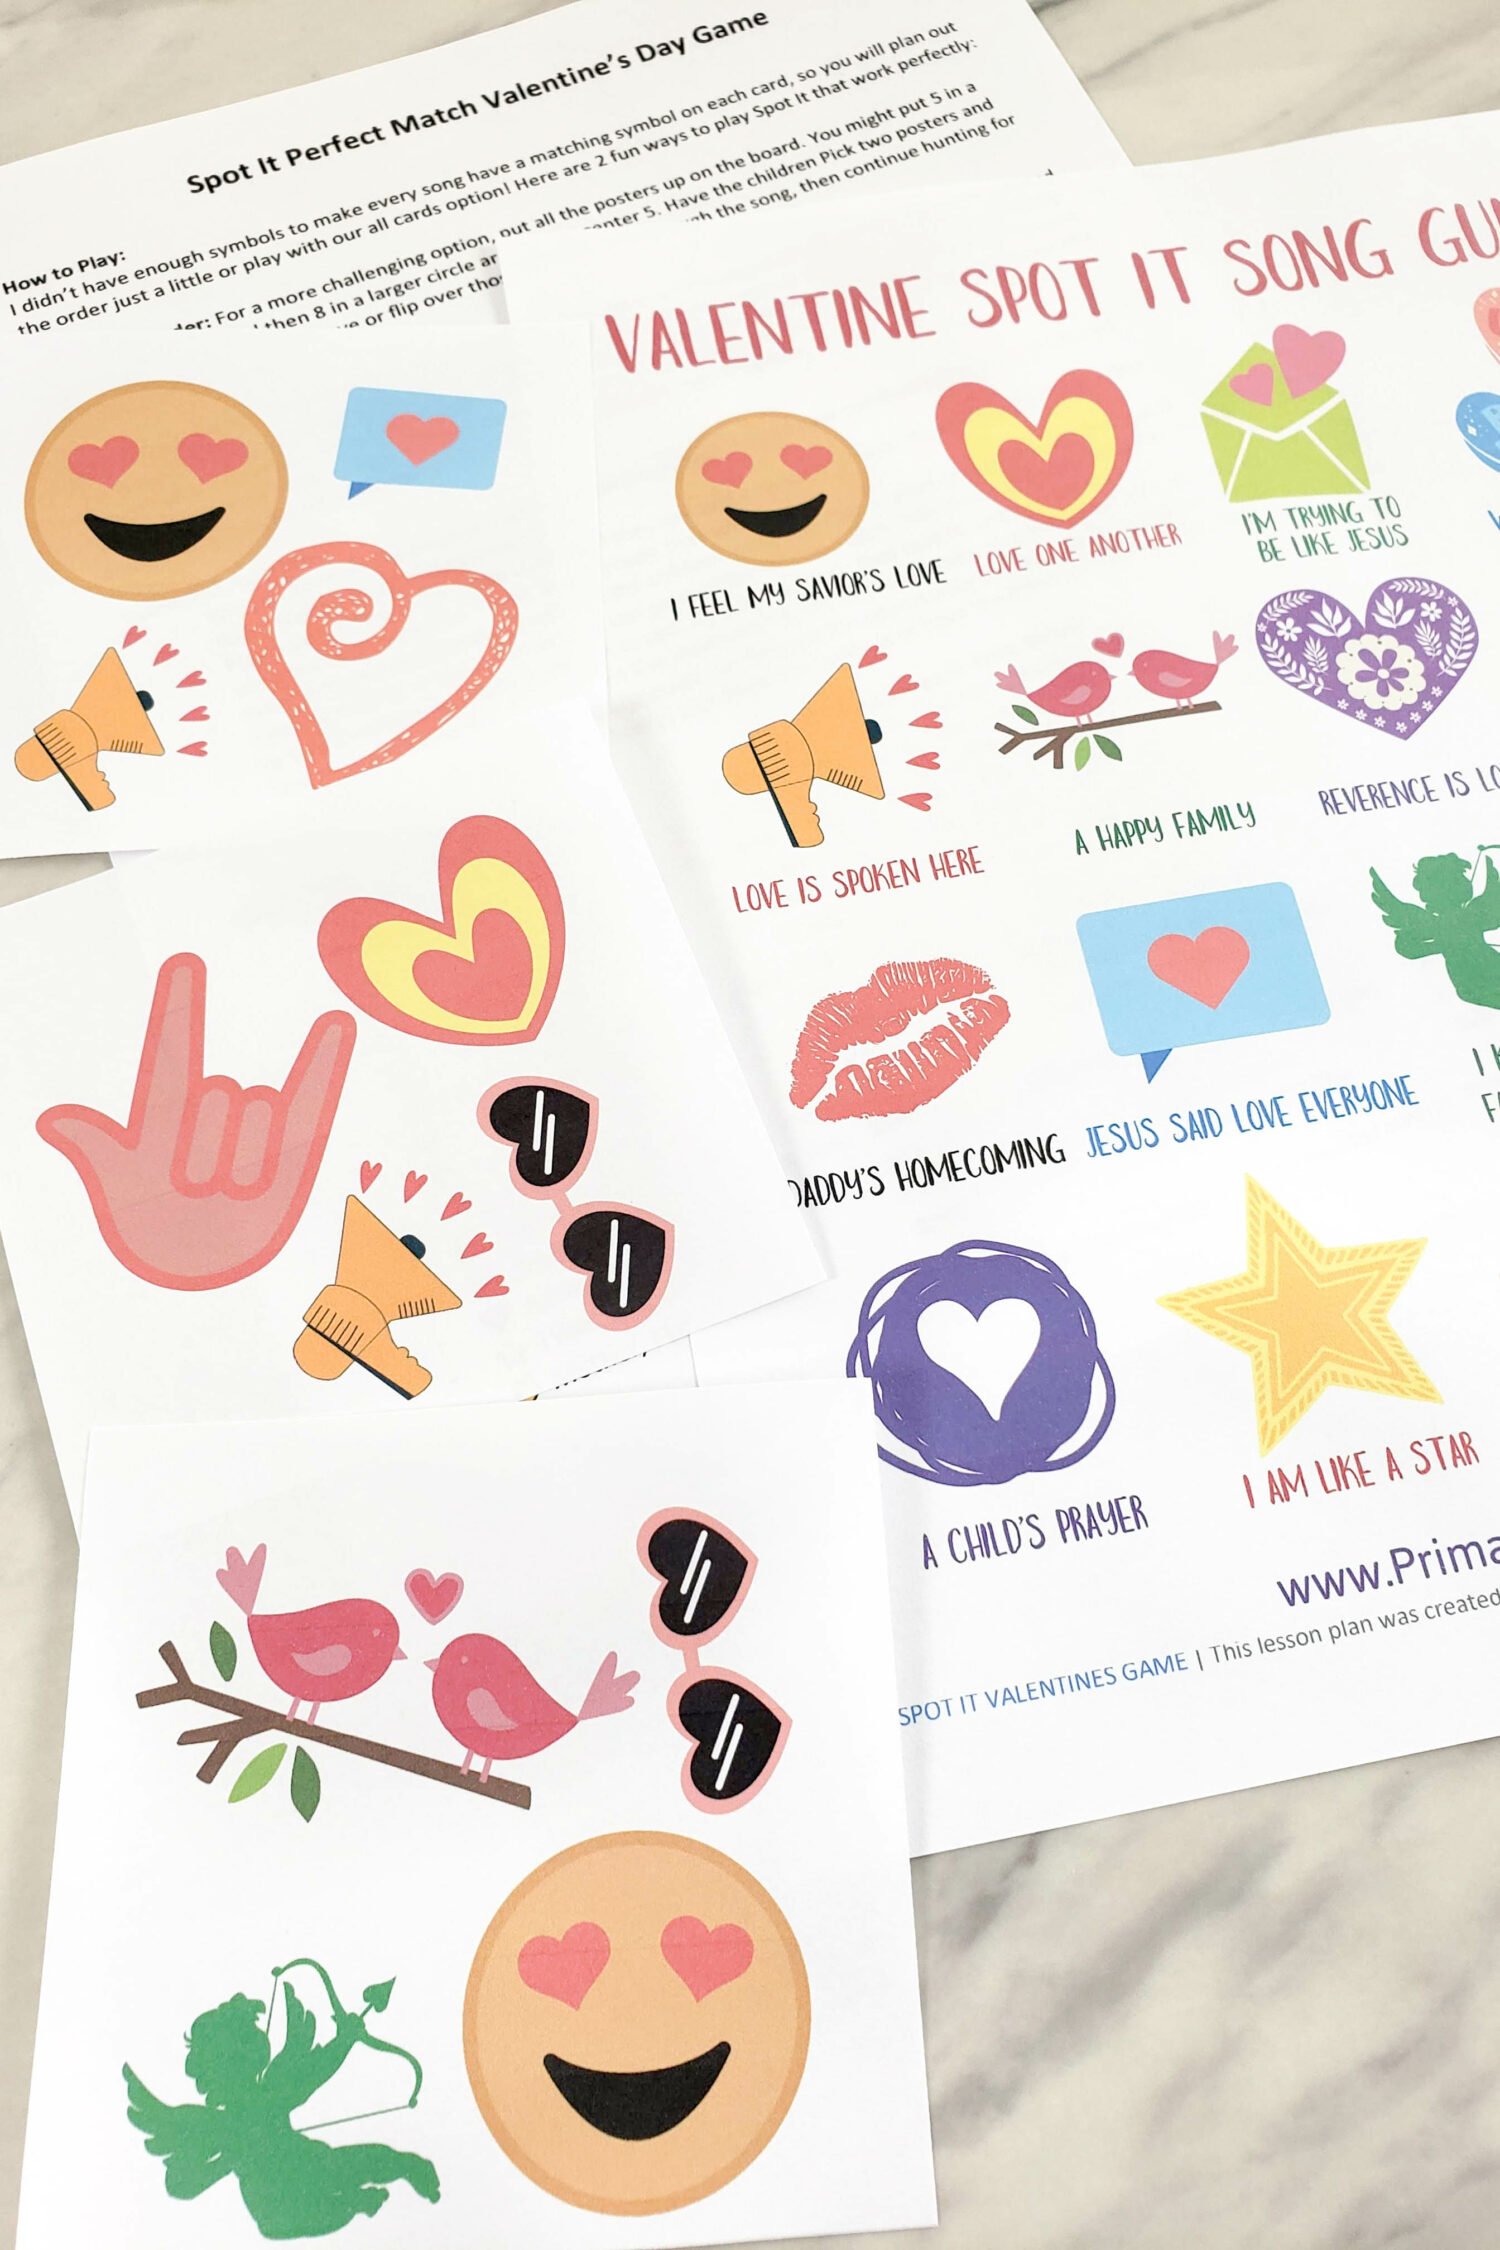 Spot It Valentine's Day Singing Time game using LDS Primary Songs about Love! Includes a helpful key to match the symbols with songs or use it without the songs for a fun vday game for kids